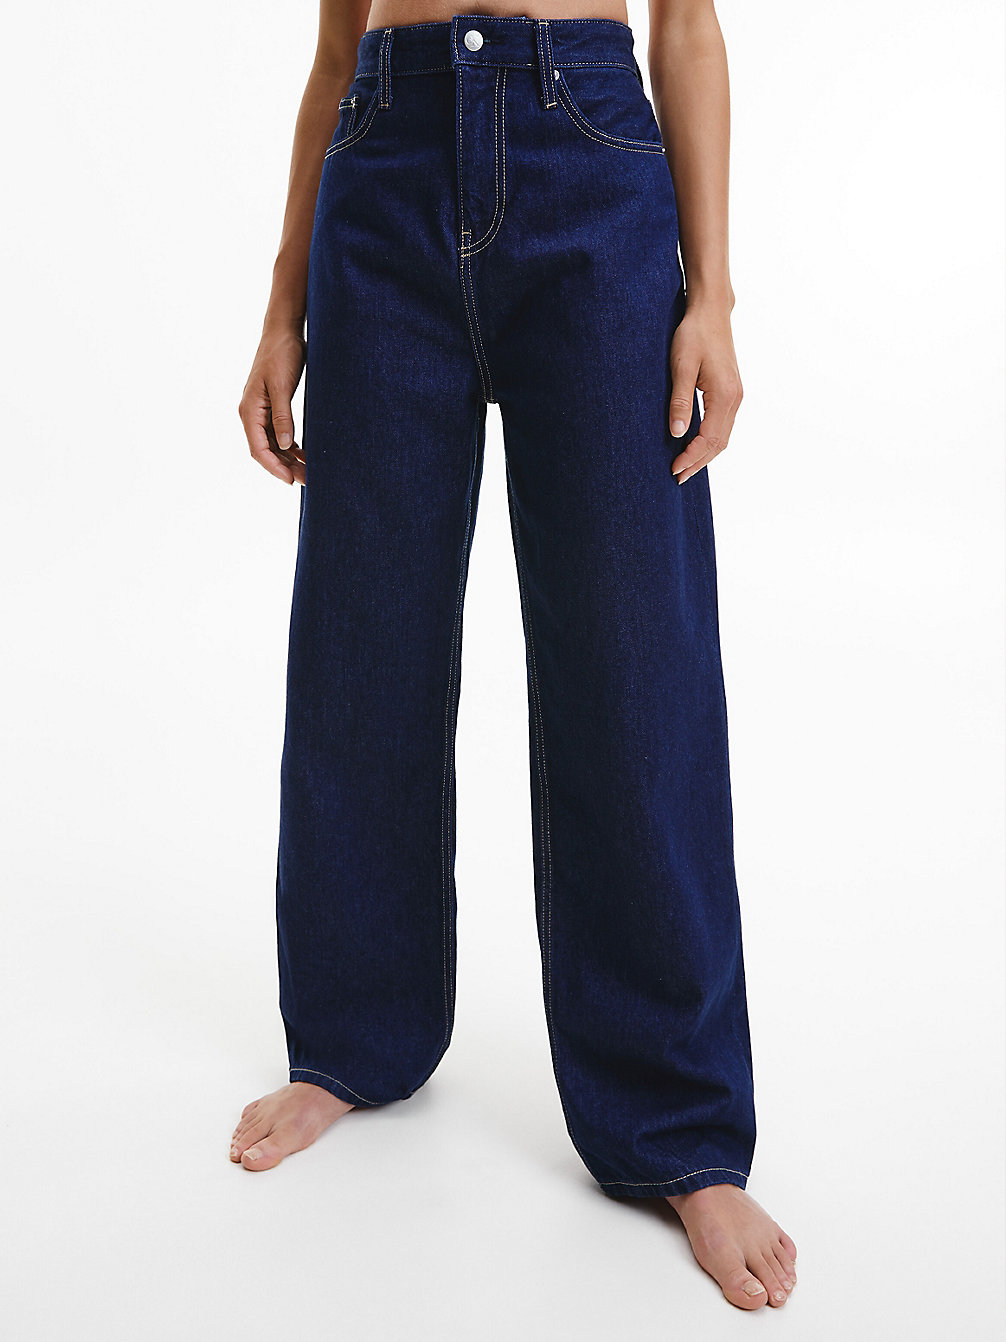 High Rise Relaxed Jeans > DENIM RINSE > undefined mujer > Calvin Klein